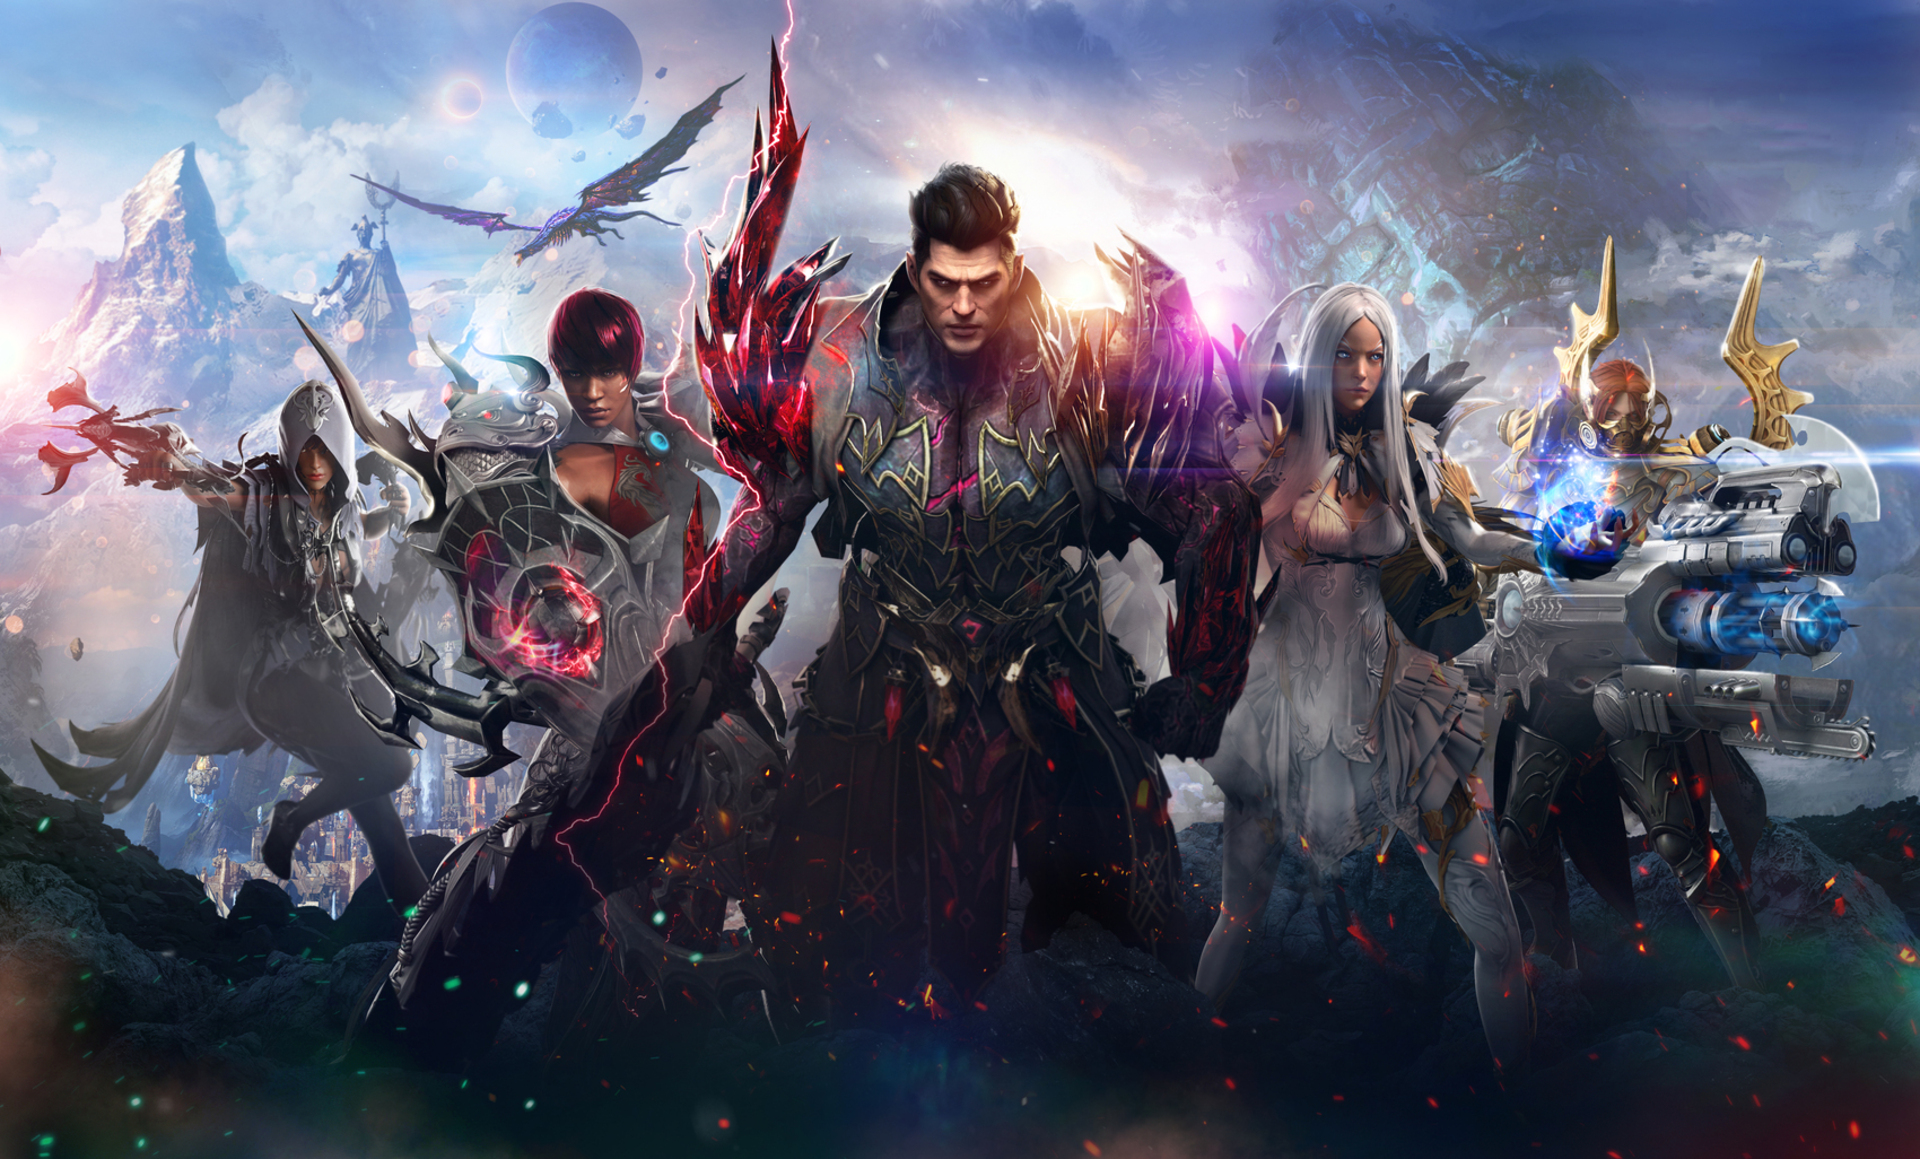 In this guide, we are going to take a look at how to check Lost Ark queue times, as Lost Ark's popularity high as ever, queue times are getting longer.